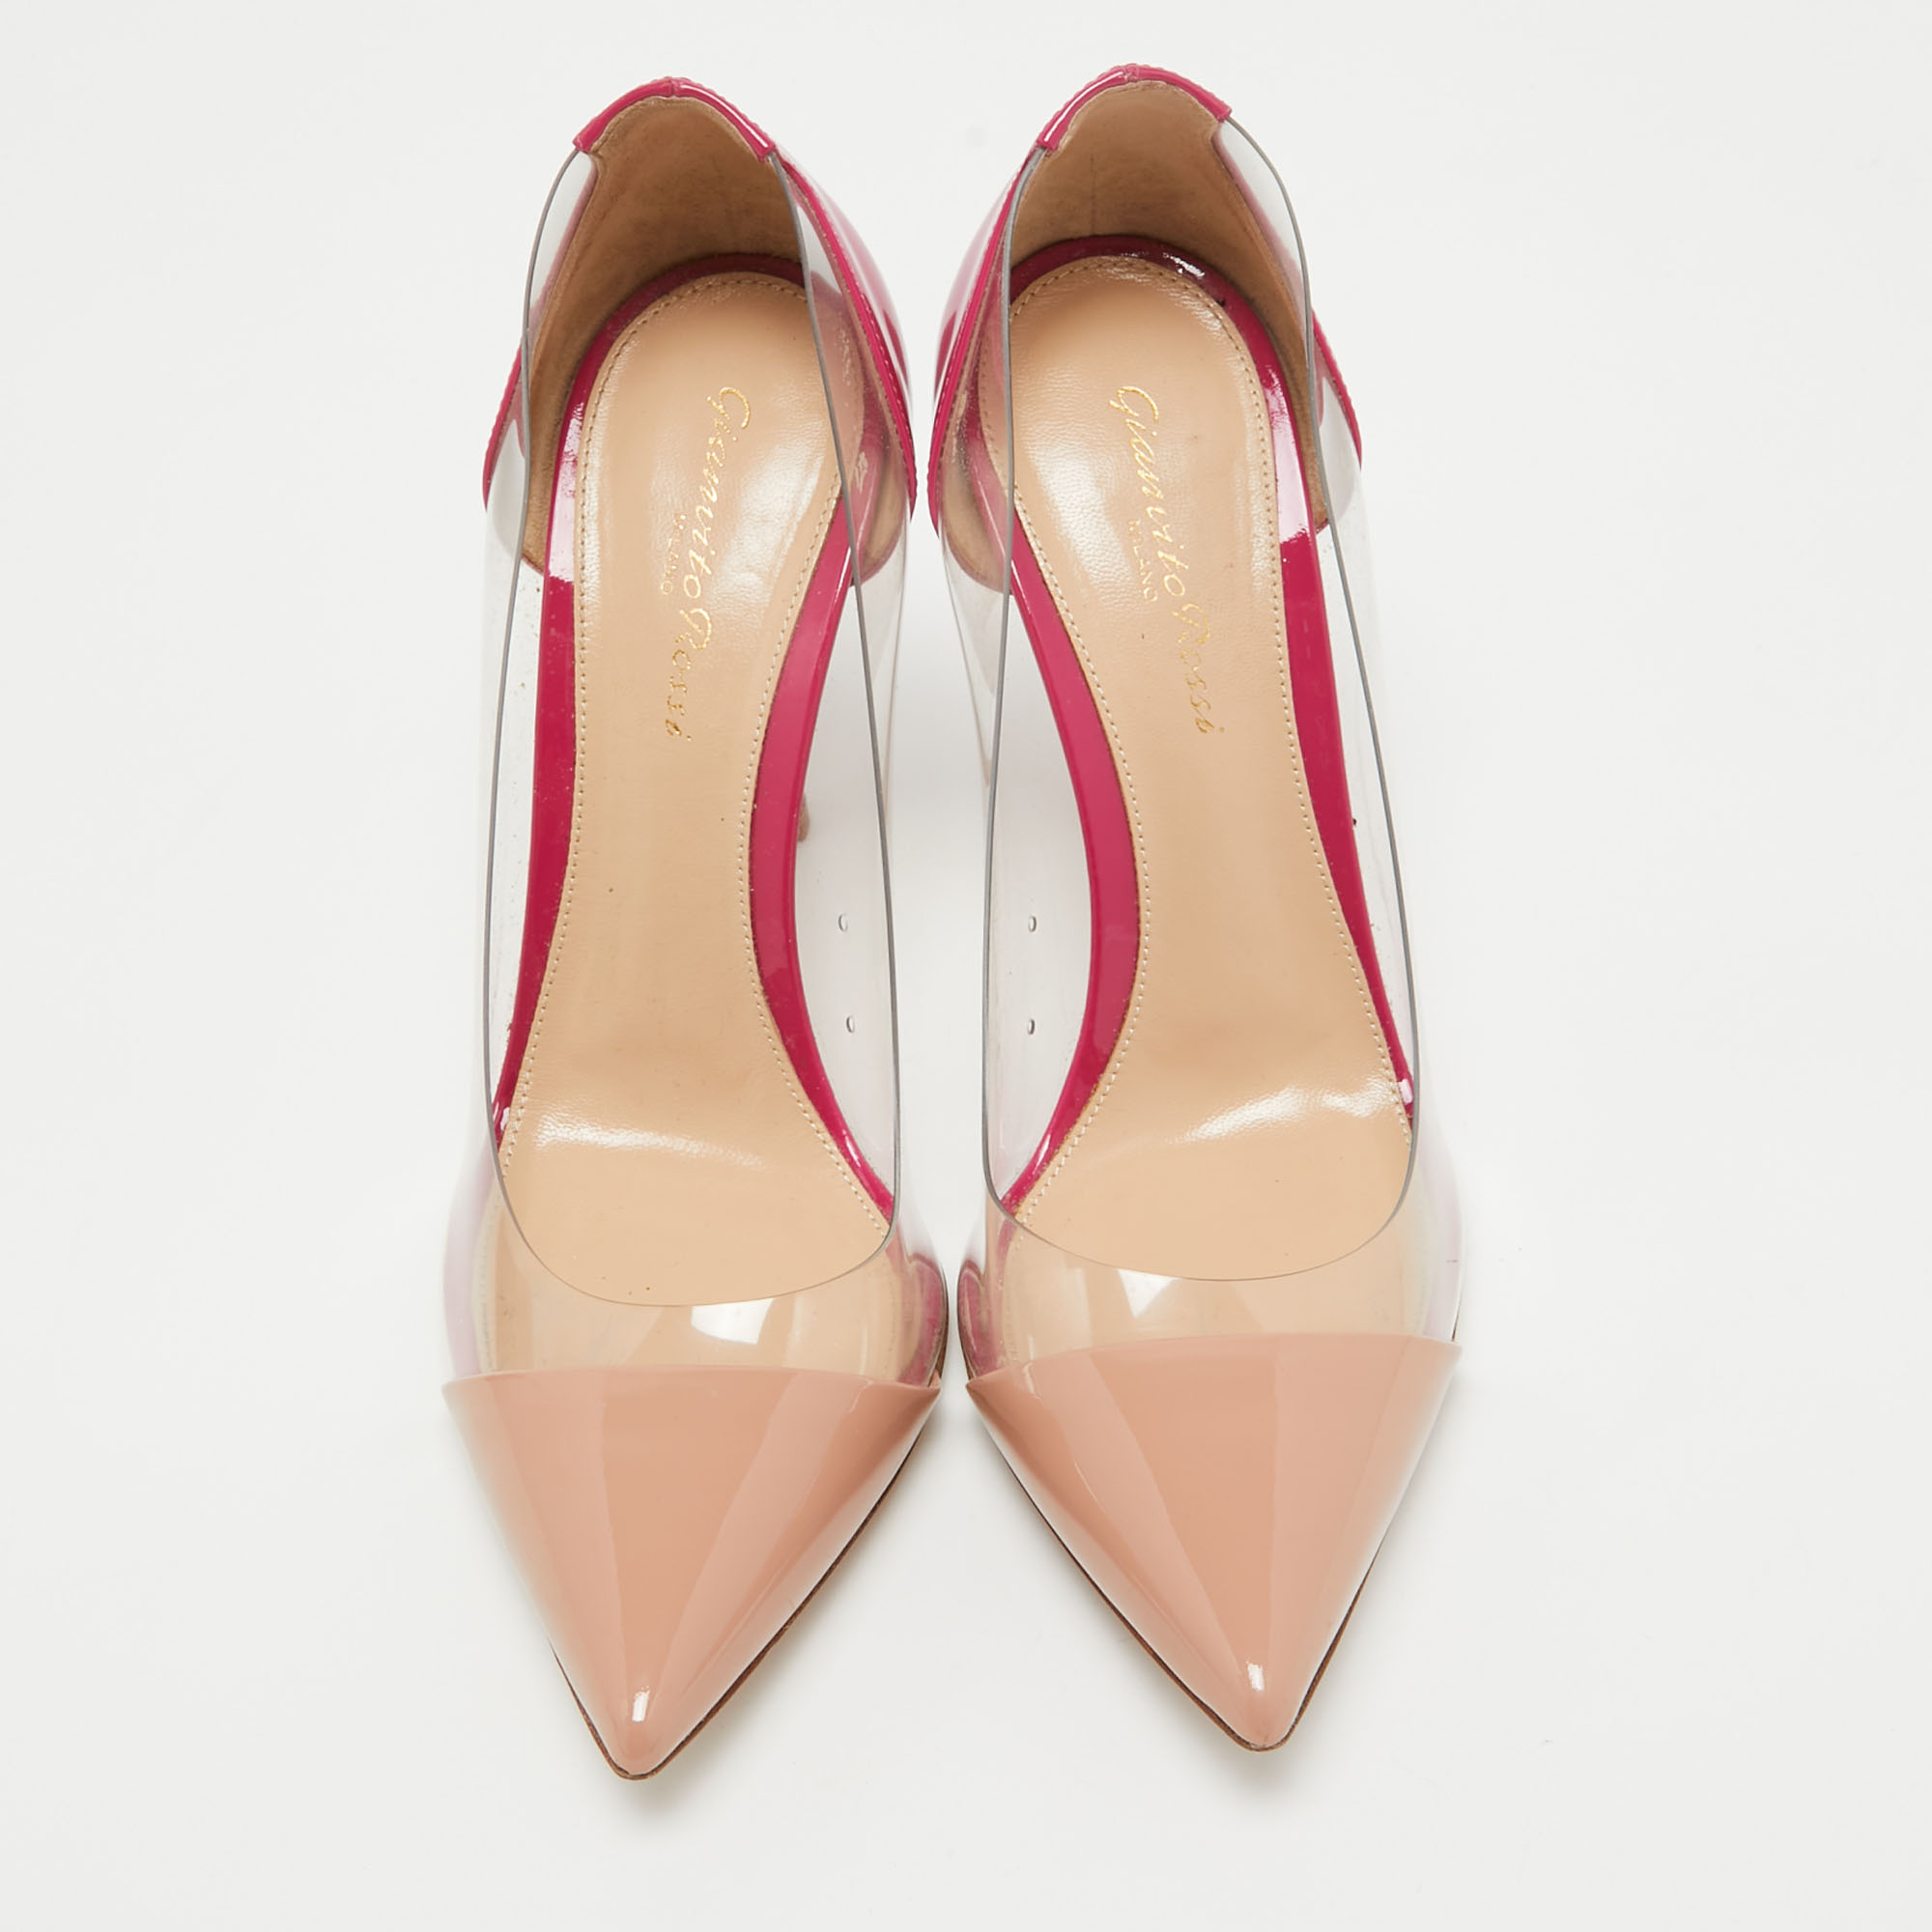 Gianvito Rossi Pink/Beige Patent Leather And PVC Plexi Pumps Size 38